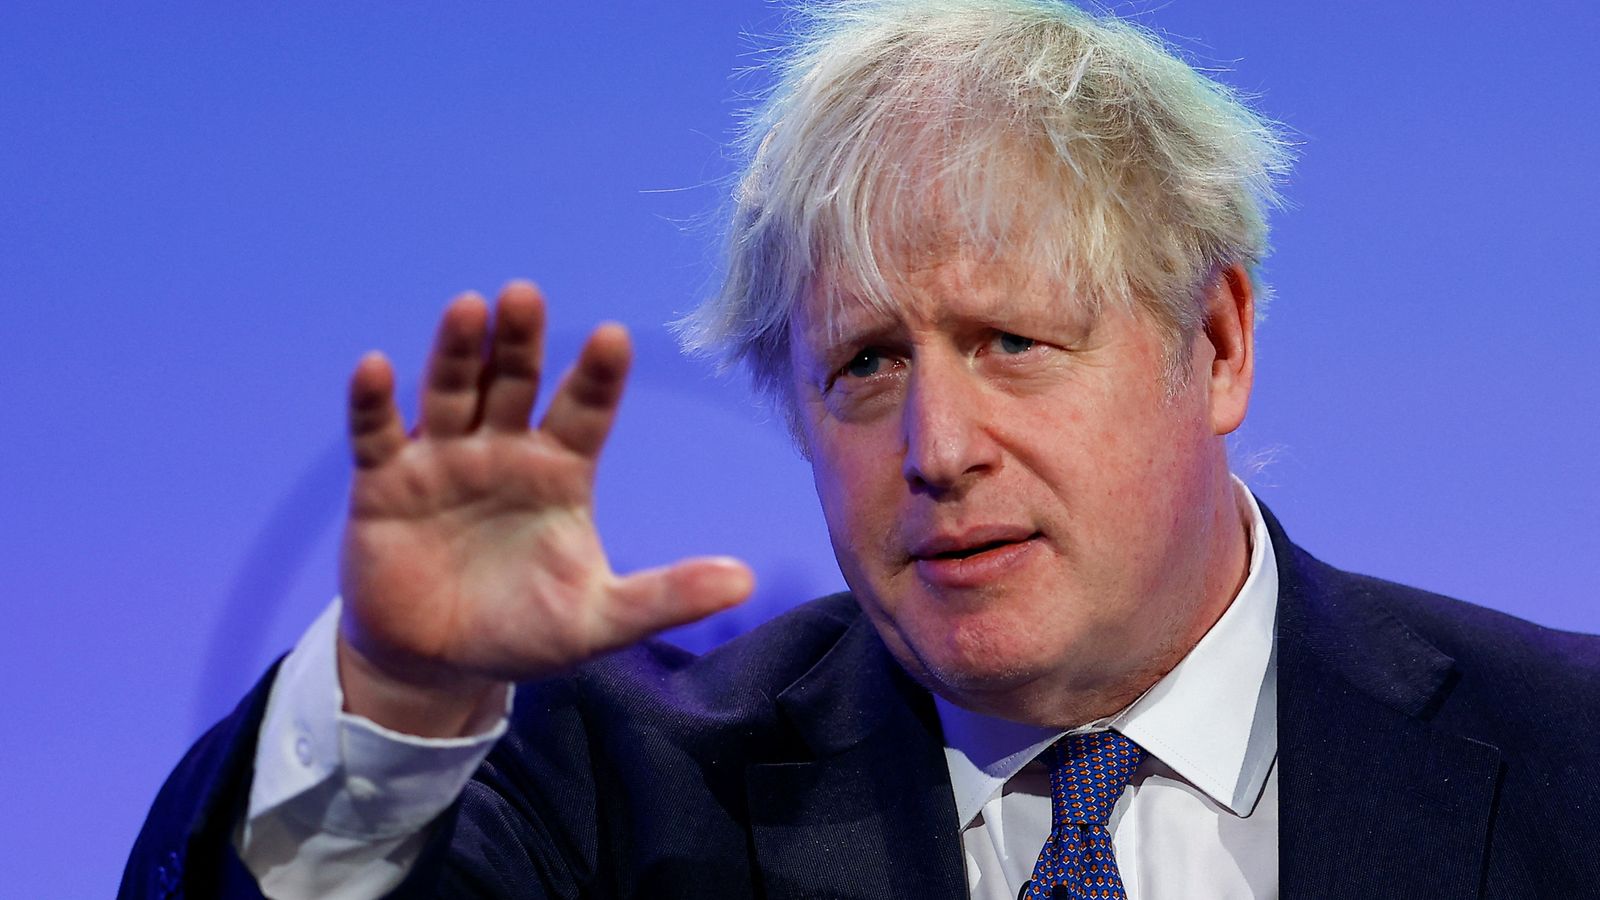 Boris Johnson partygate inquiry: Expect sparks to fly as former prime minister faces four-hour grilling by MPs